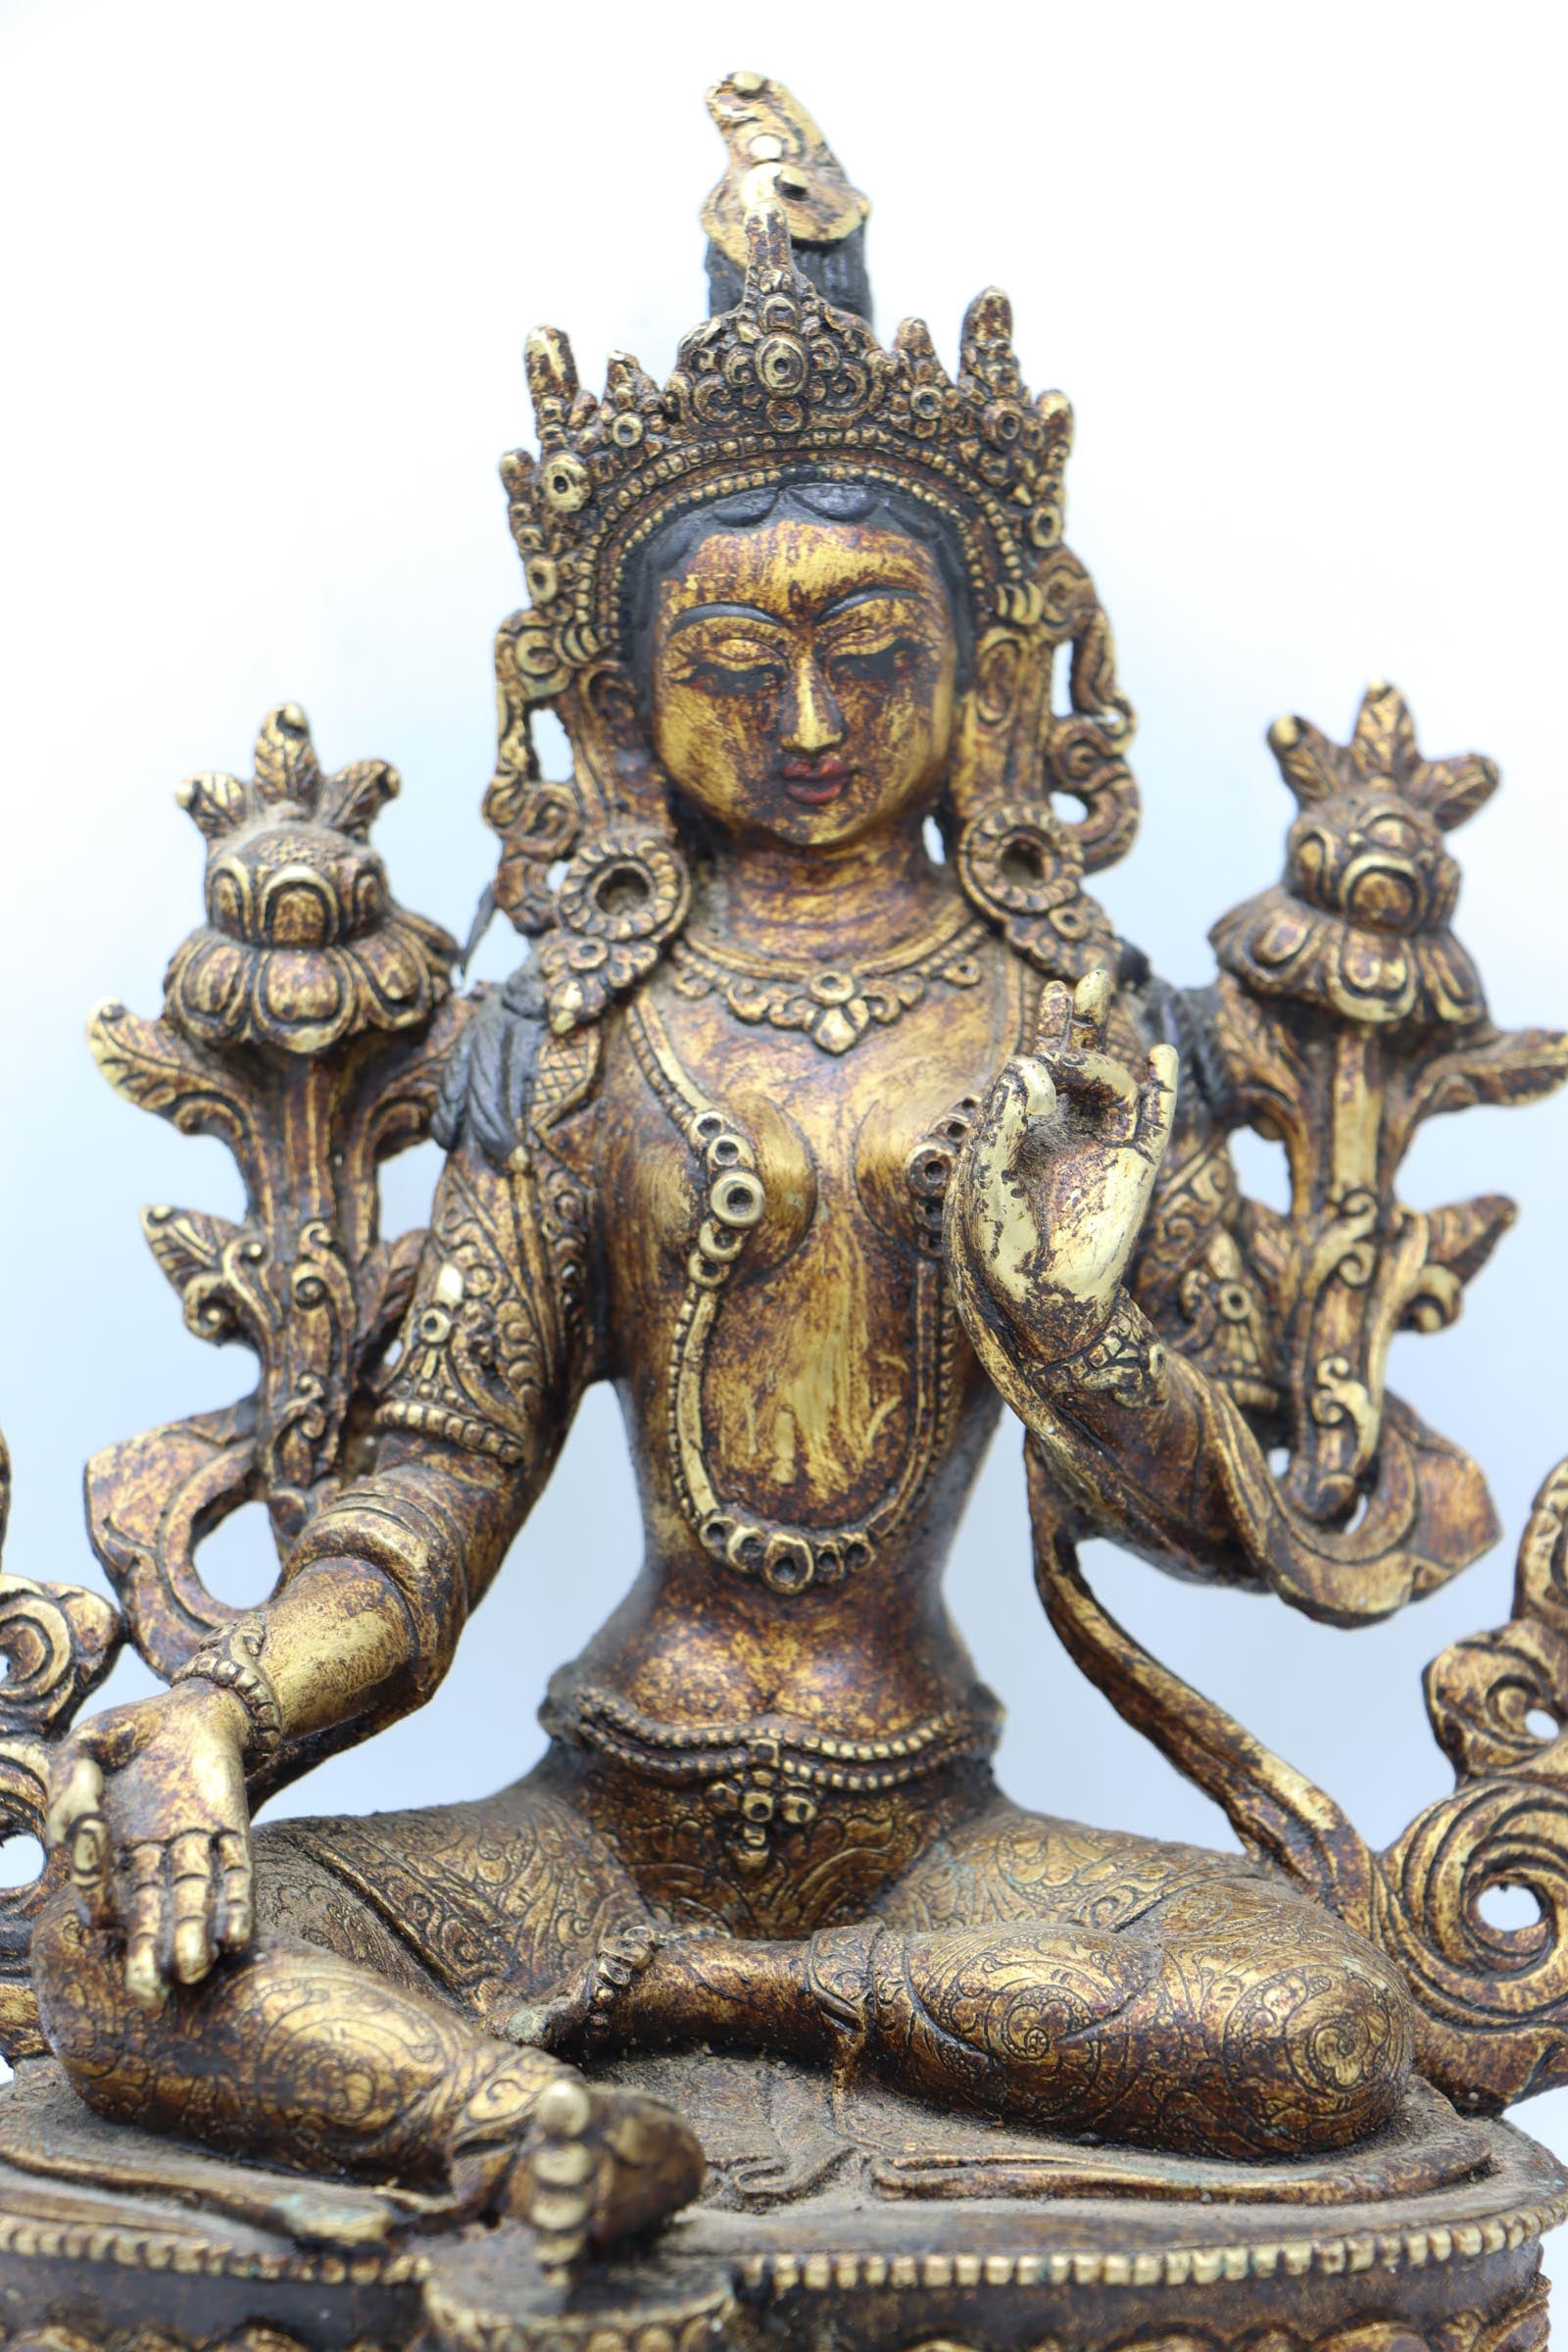 Green Tara Statue for healing, and freedom from unease and obstructions.